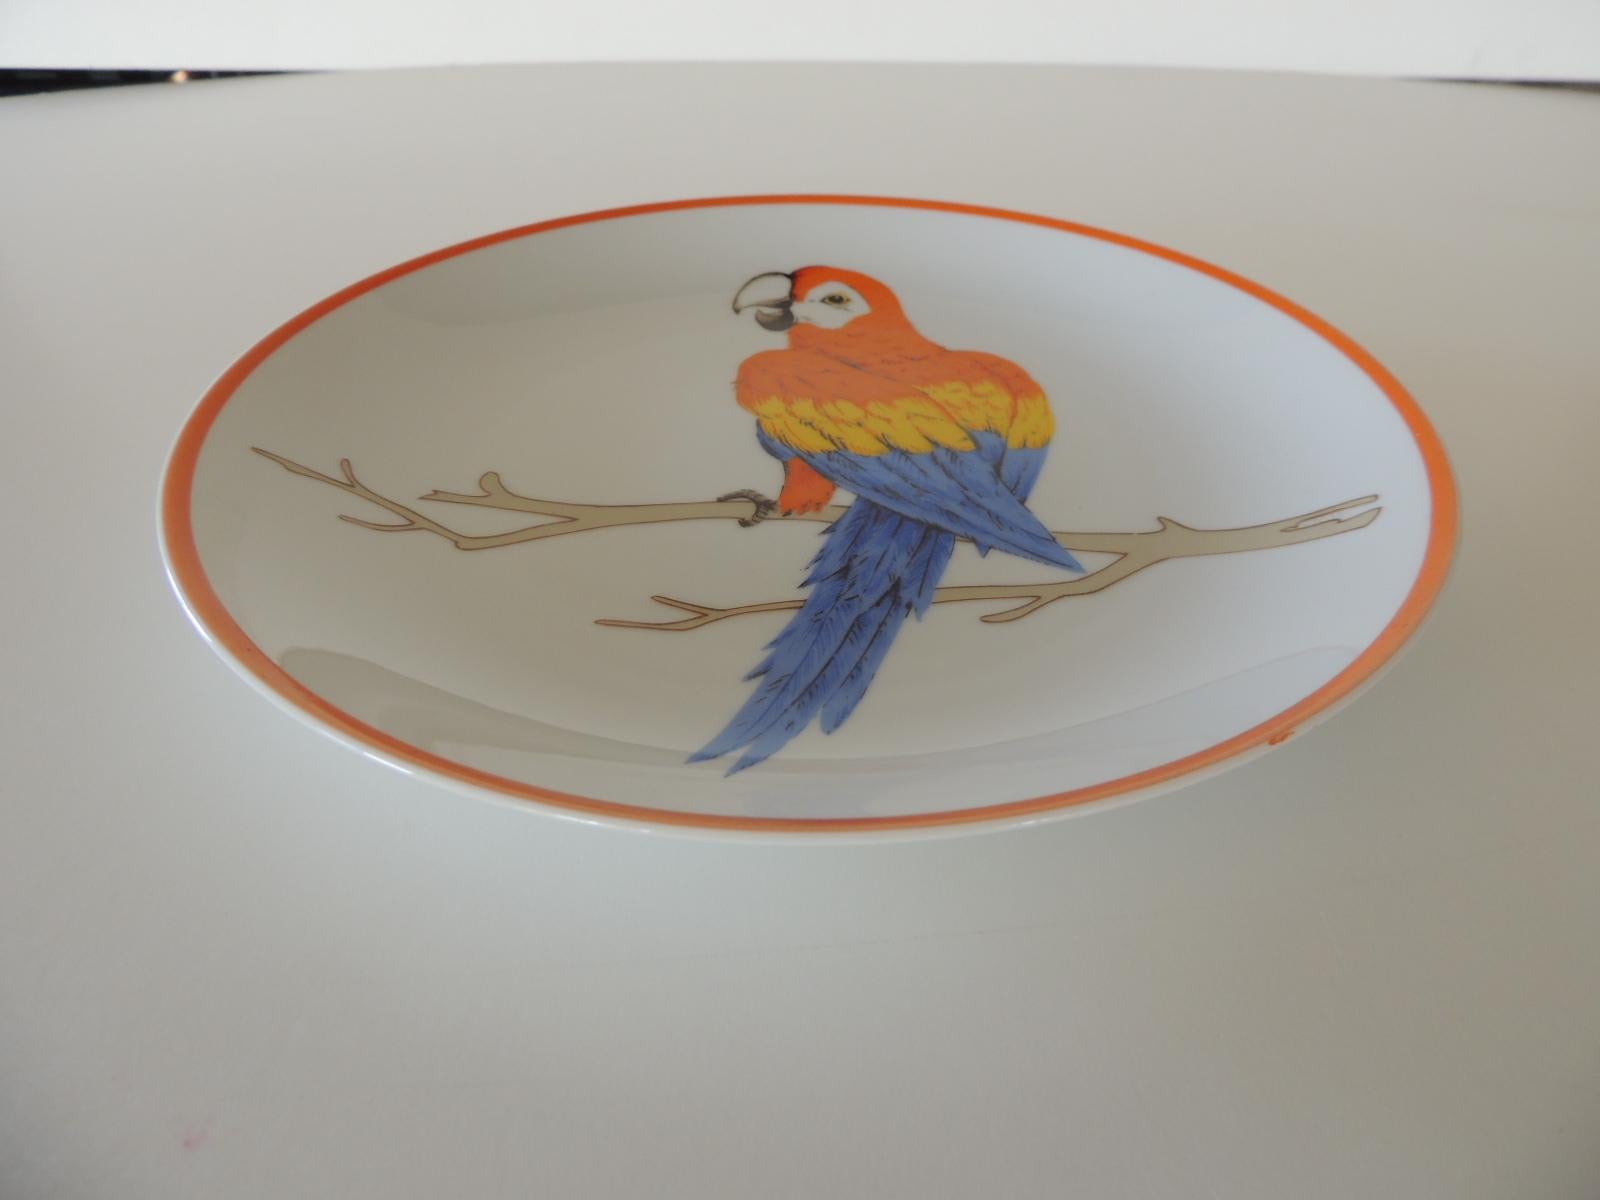 Bohemian Round Orange and Blue Macaw Parrot Decorative Plate